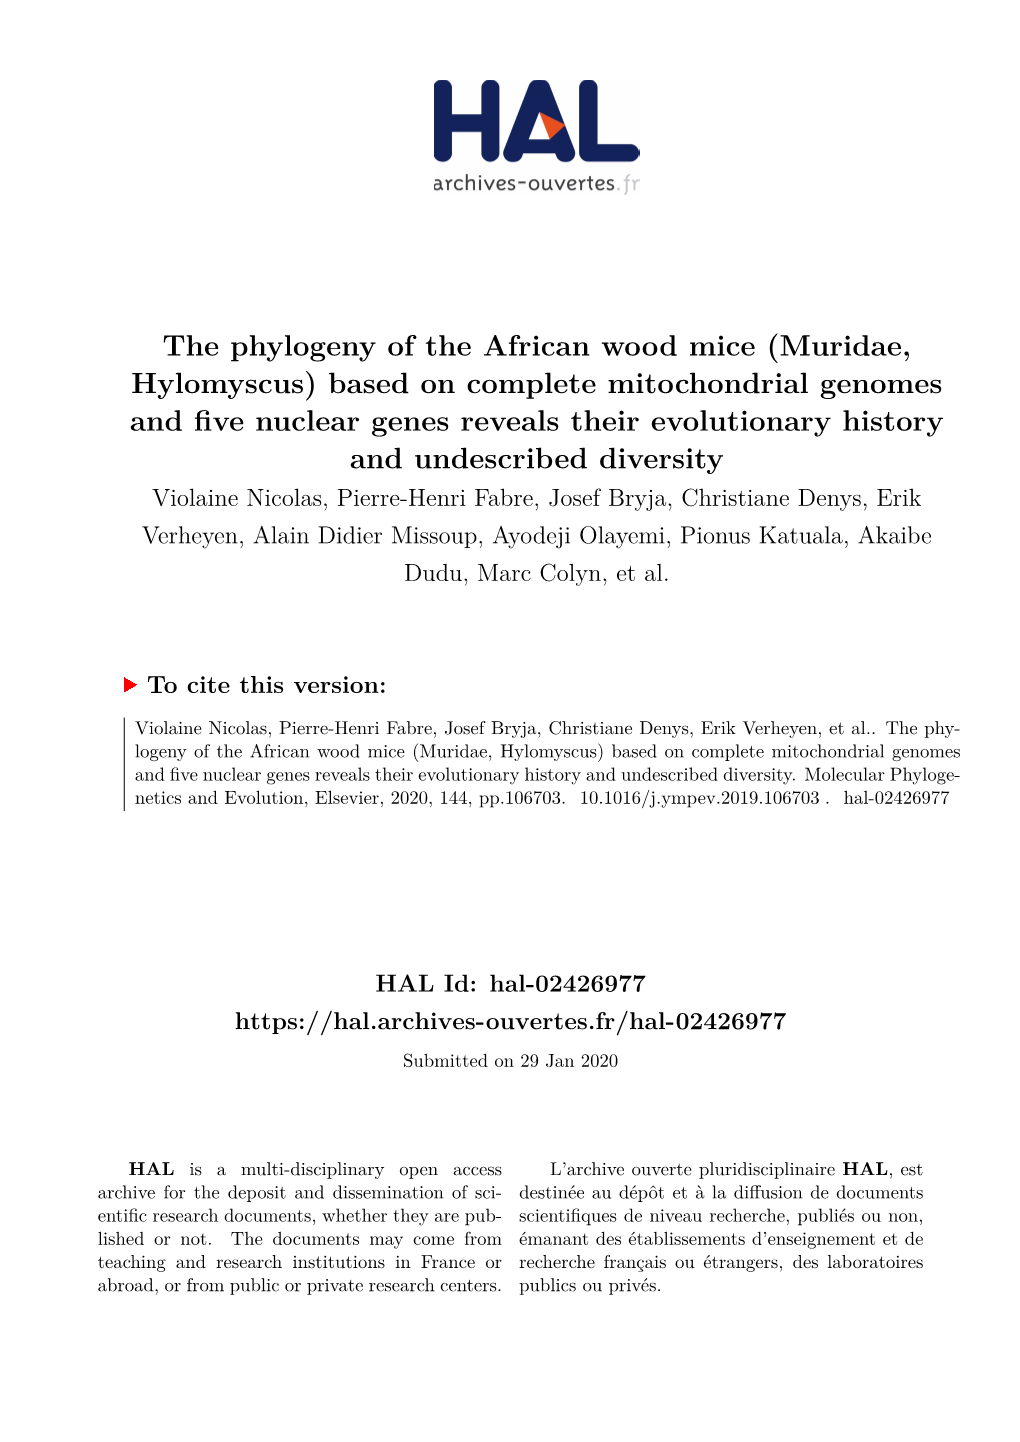 The Phylogeny of the African Wood Mice (Muridae, Hylomyscus) Based on Complete Mitochondrial Genomes and Five Nuclear Genes Reve